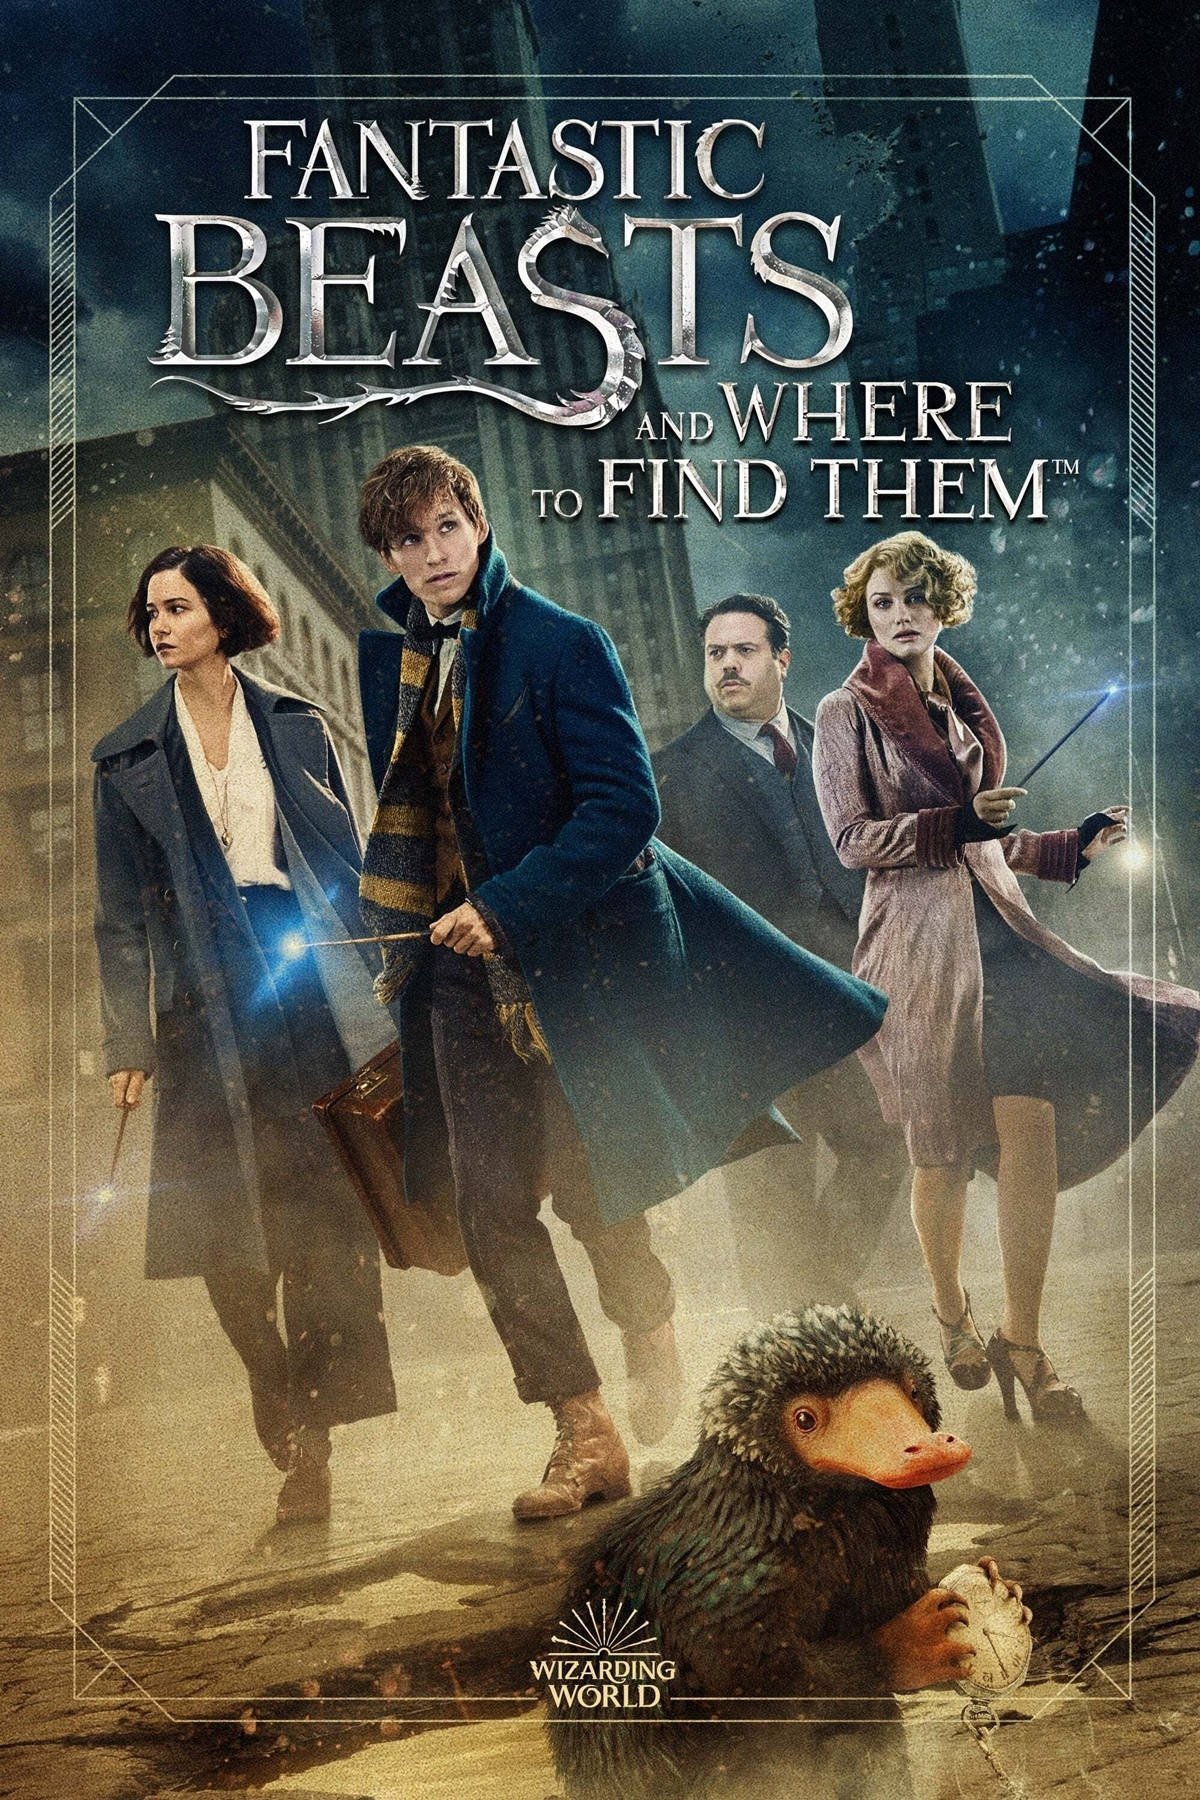 Fantastic Beasts And Where To Find Them Movie Poster Wallpaper